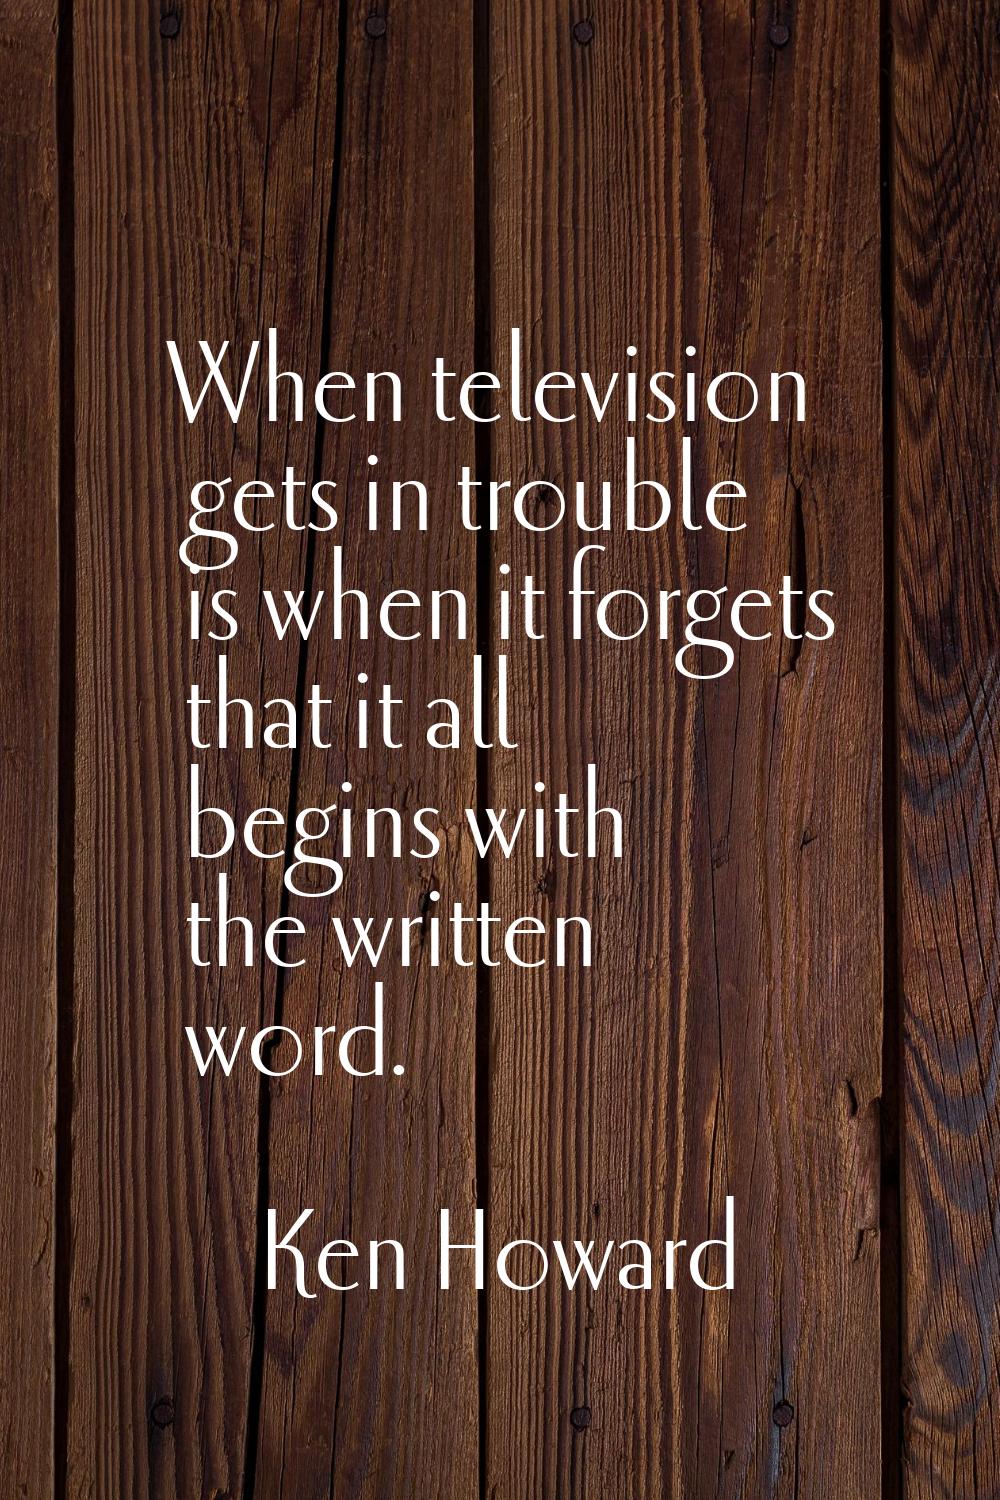 When television gets in trouble is when it forgets that it all begins with the written word.